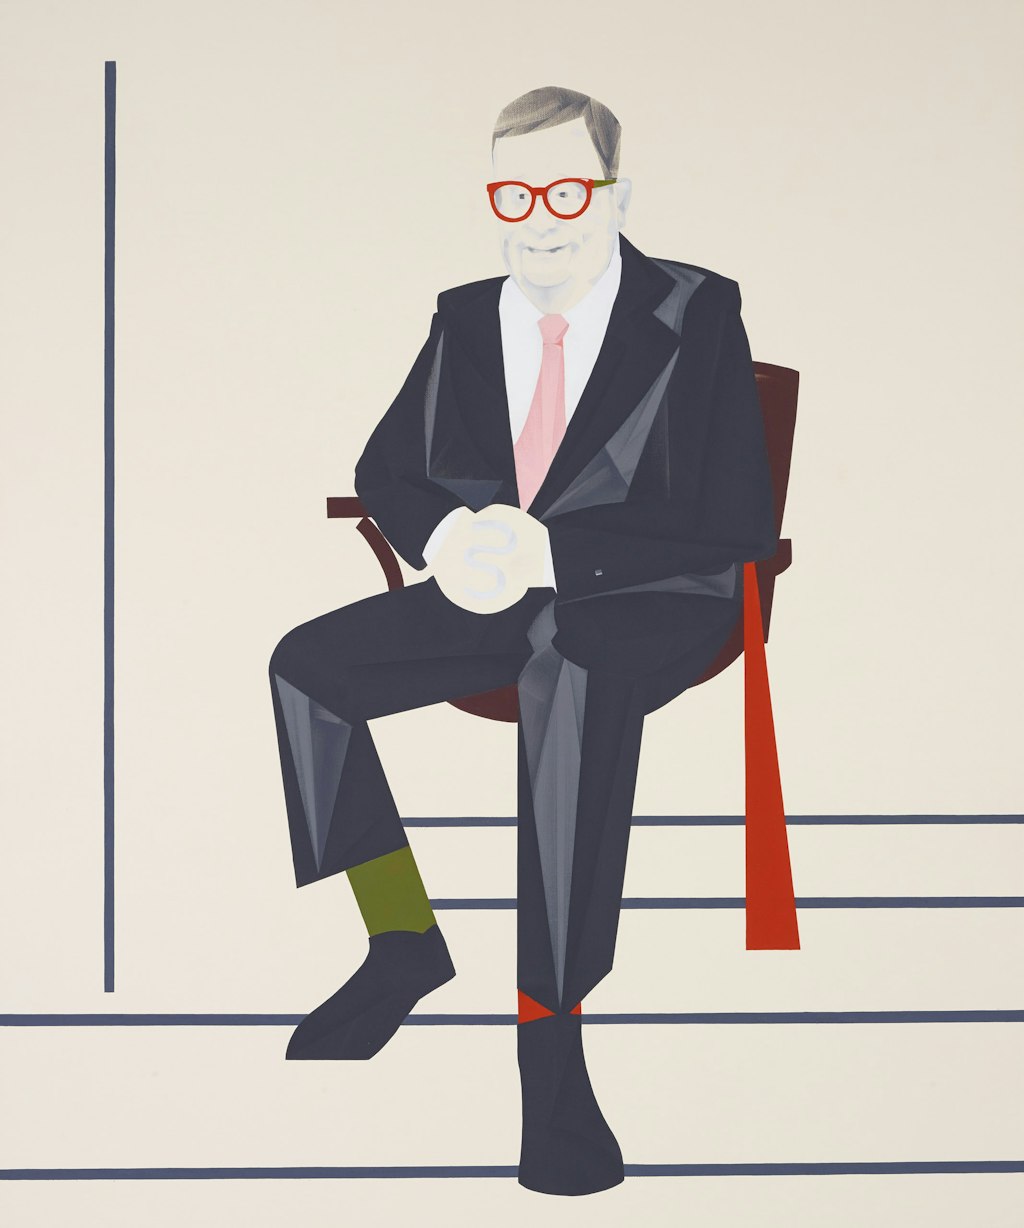 A person sitting in a chair, wearing a dark suit, white shirt, pink tie, one green sock, one red sock and red glasses